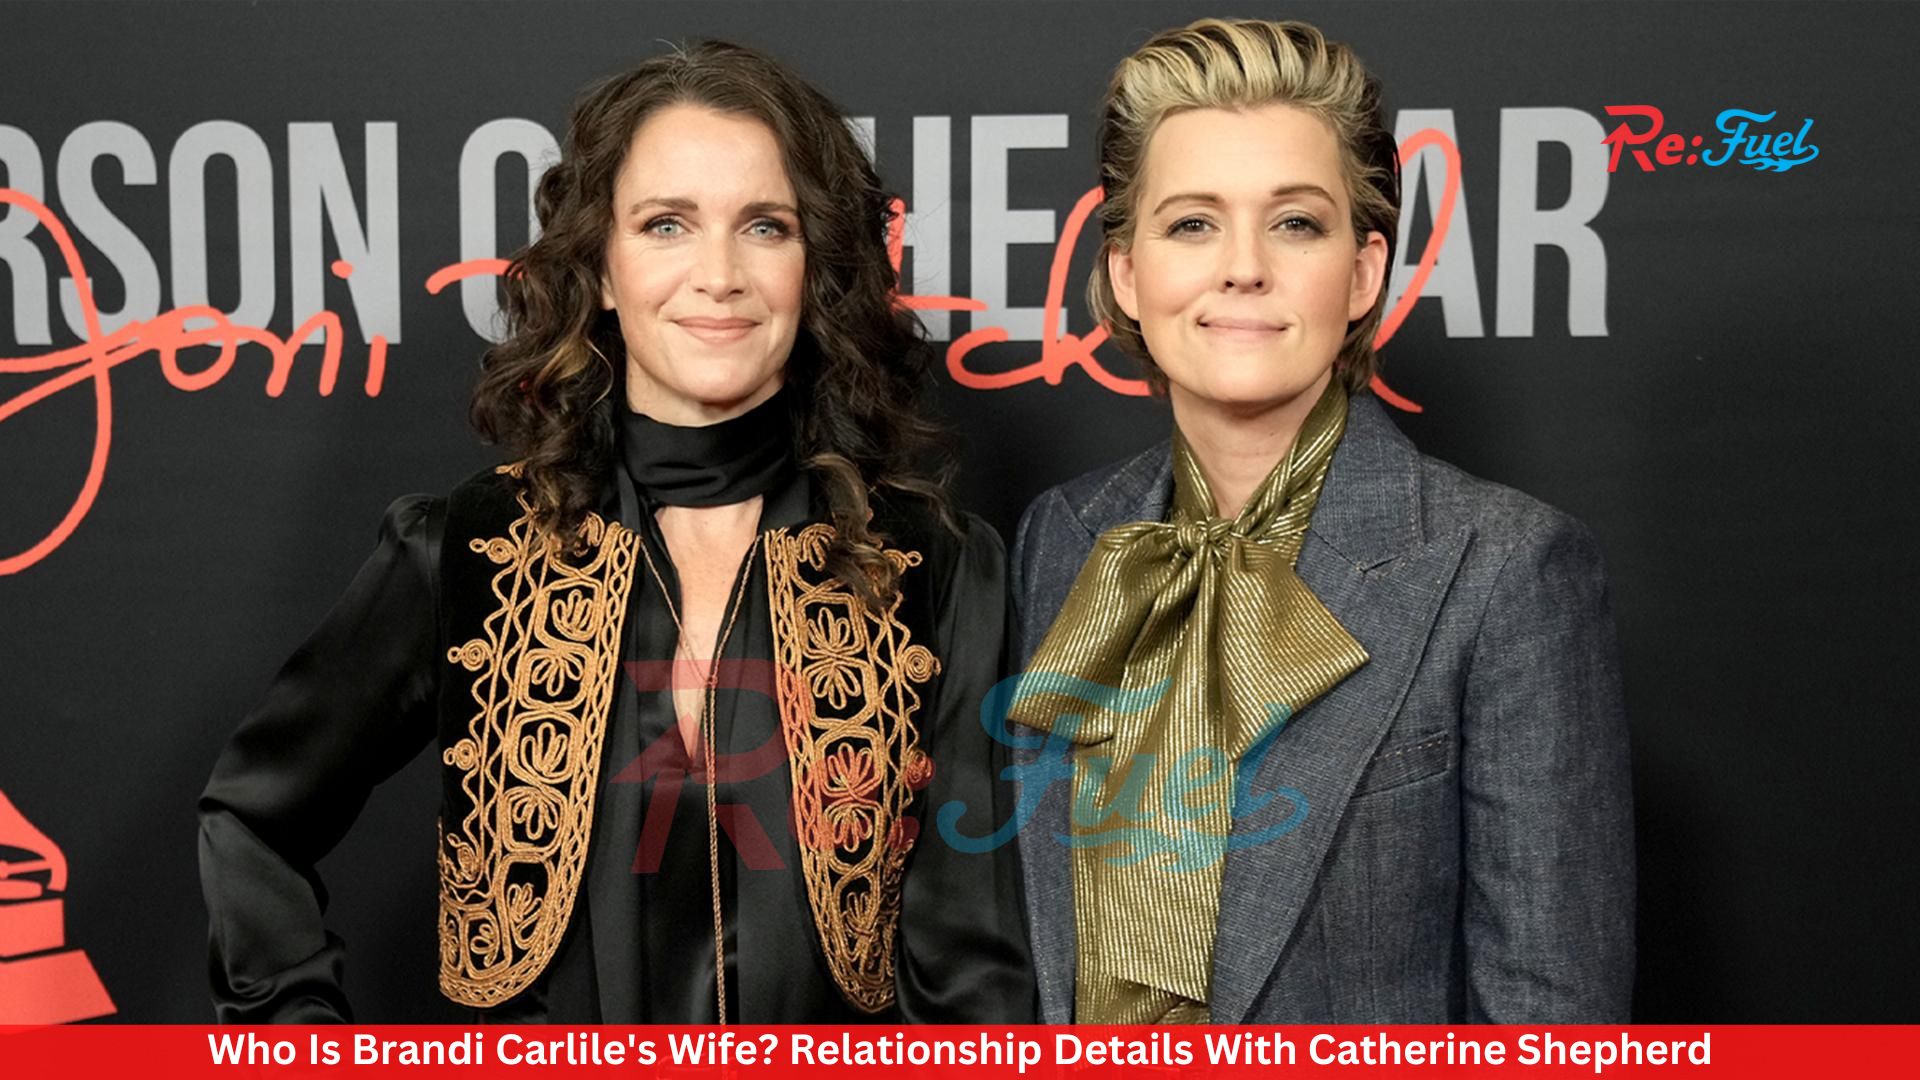 Who Is Brandi Carlile's Wife? Relationship Details With Catherine Shepherd